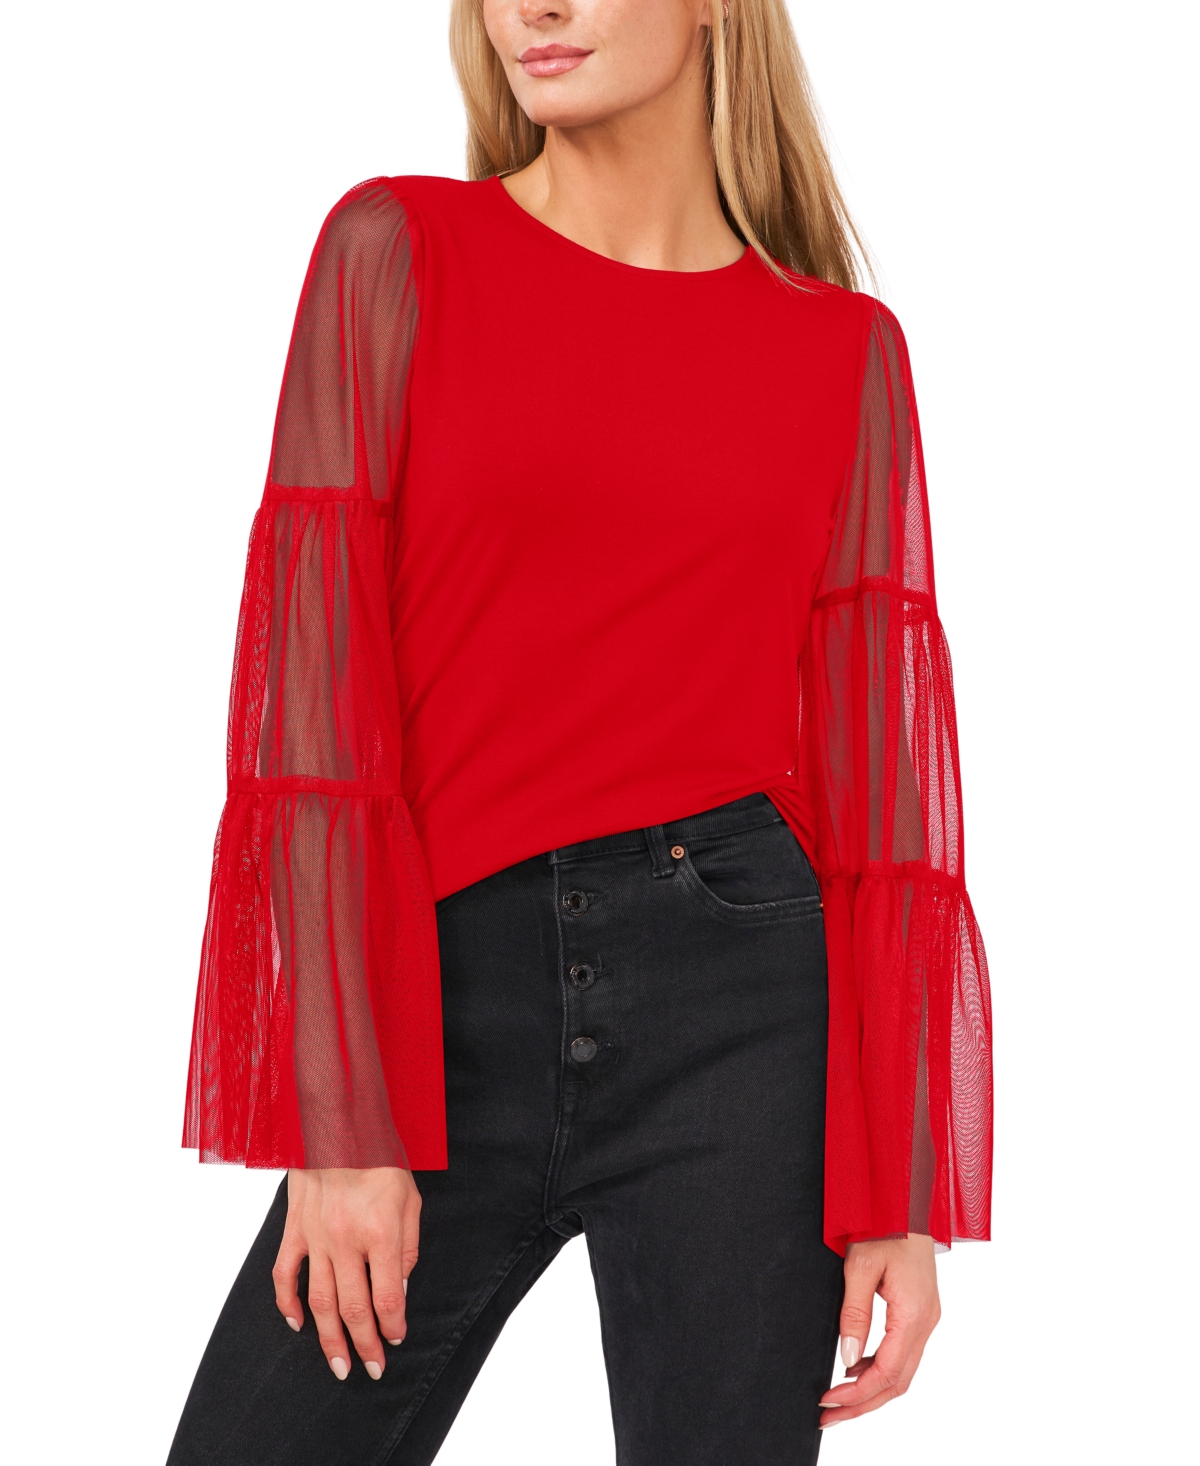 Vince Camuto Women's Mesh Bell-Sleeve Top